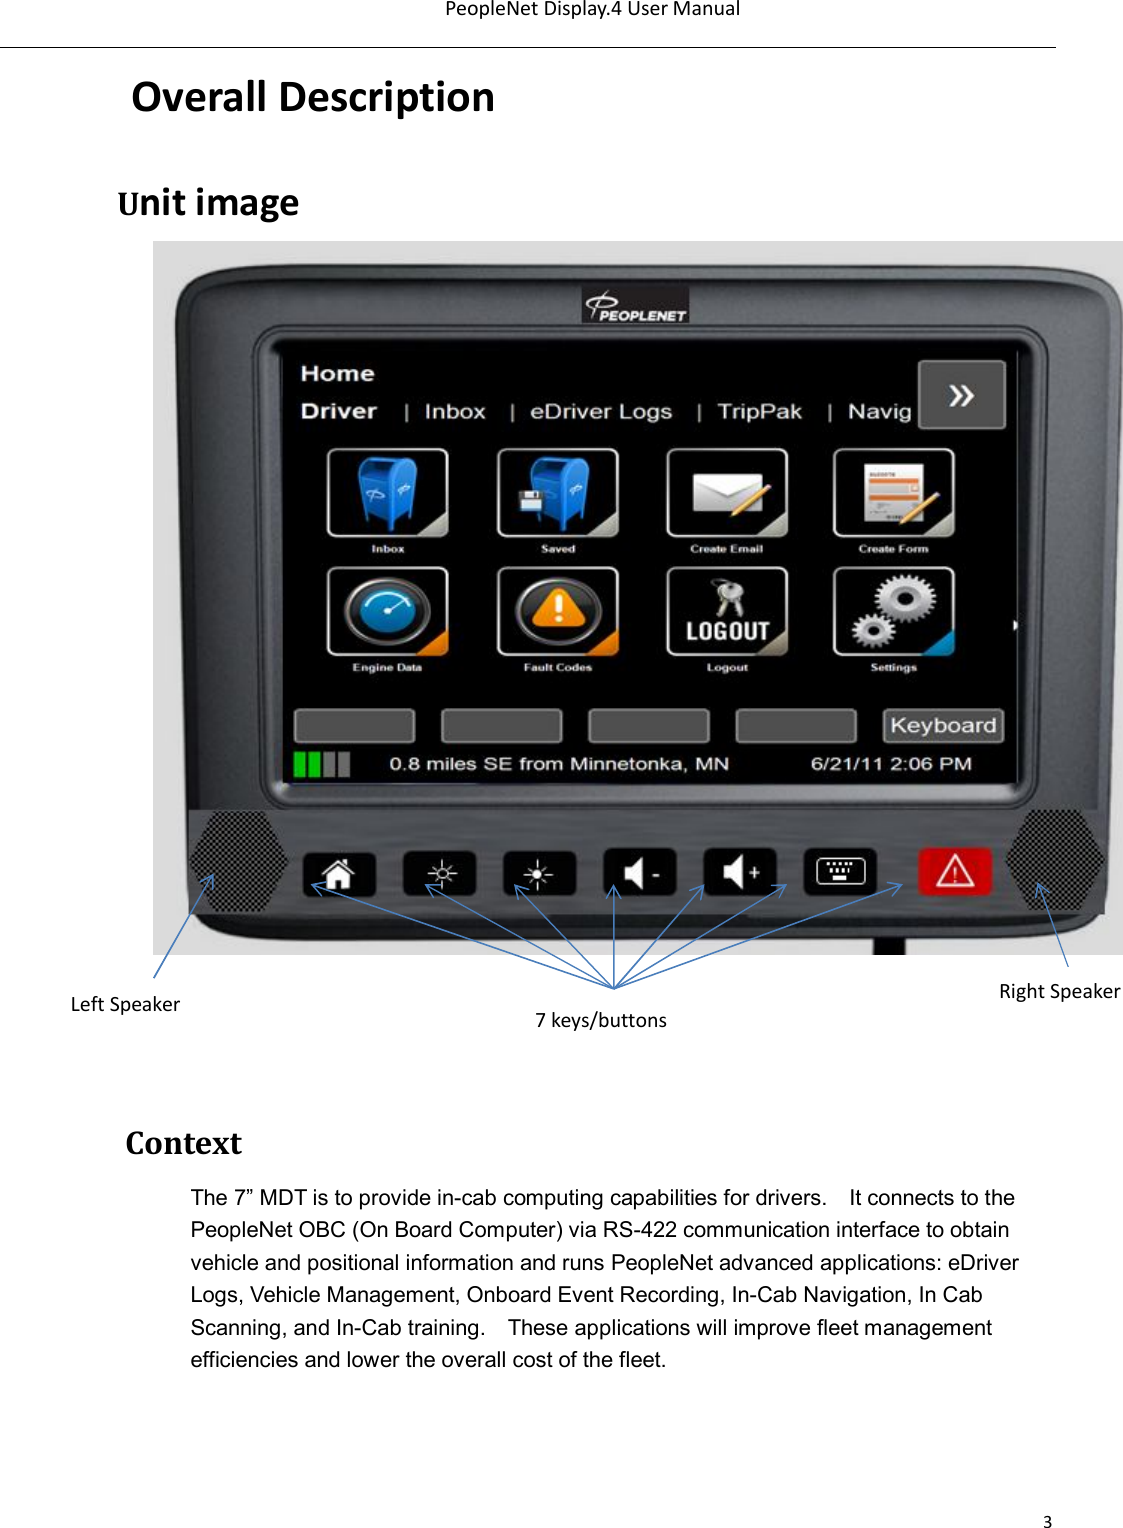 PeopleNet Display.4 User Manual  3  Overall Description Unit image      Context The 7” MDT is to provide in-cab computing capabilities for drivers.    It connects to the PeopleNet OBC (On Board Computer) via RS-422 communication interface to obtain vehicle and positional information and runs PeopleNet advanced applications: eDriver Logs, Vehicle Management, Onboard Event Recording, In-Cab Navigation, In Cab Scanning, and In-Cab training.    These applications will improve fleet management efficiencies and lower the overall cost of the fleet.  Left Speaker  Right Speaker 7 keys/buttons 